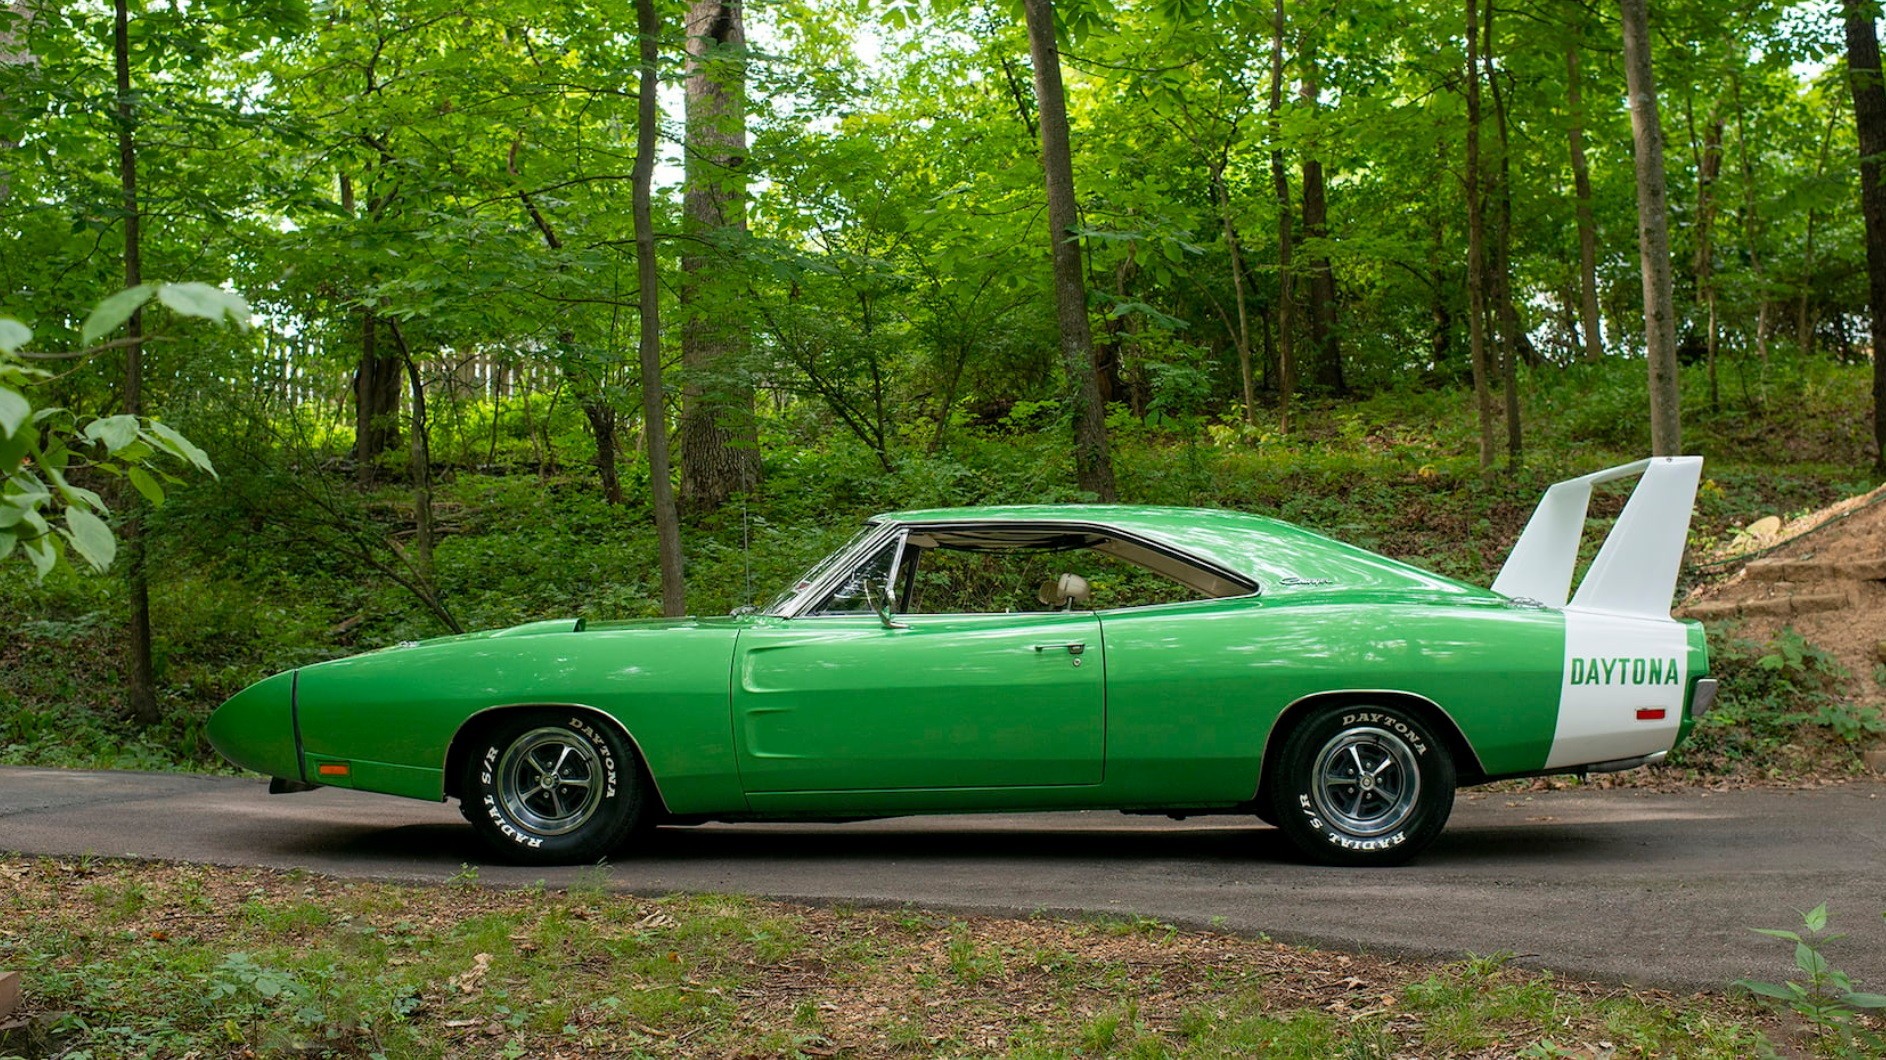 Beautifully Restored, One-Owner 1969 Dodge Charger Daytona Sells for  $418,000 - autoevolution